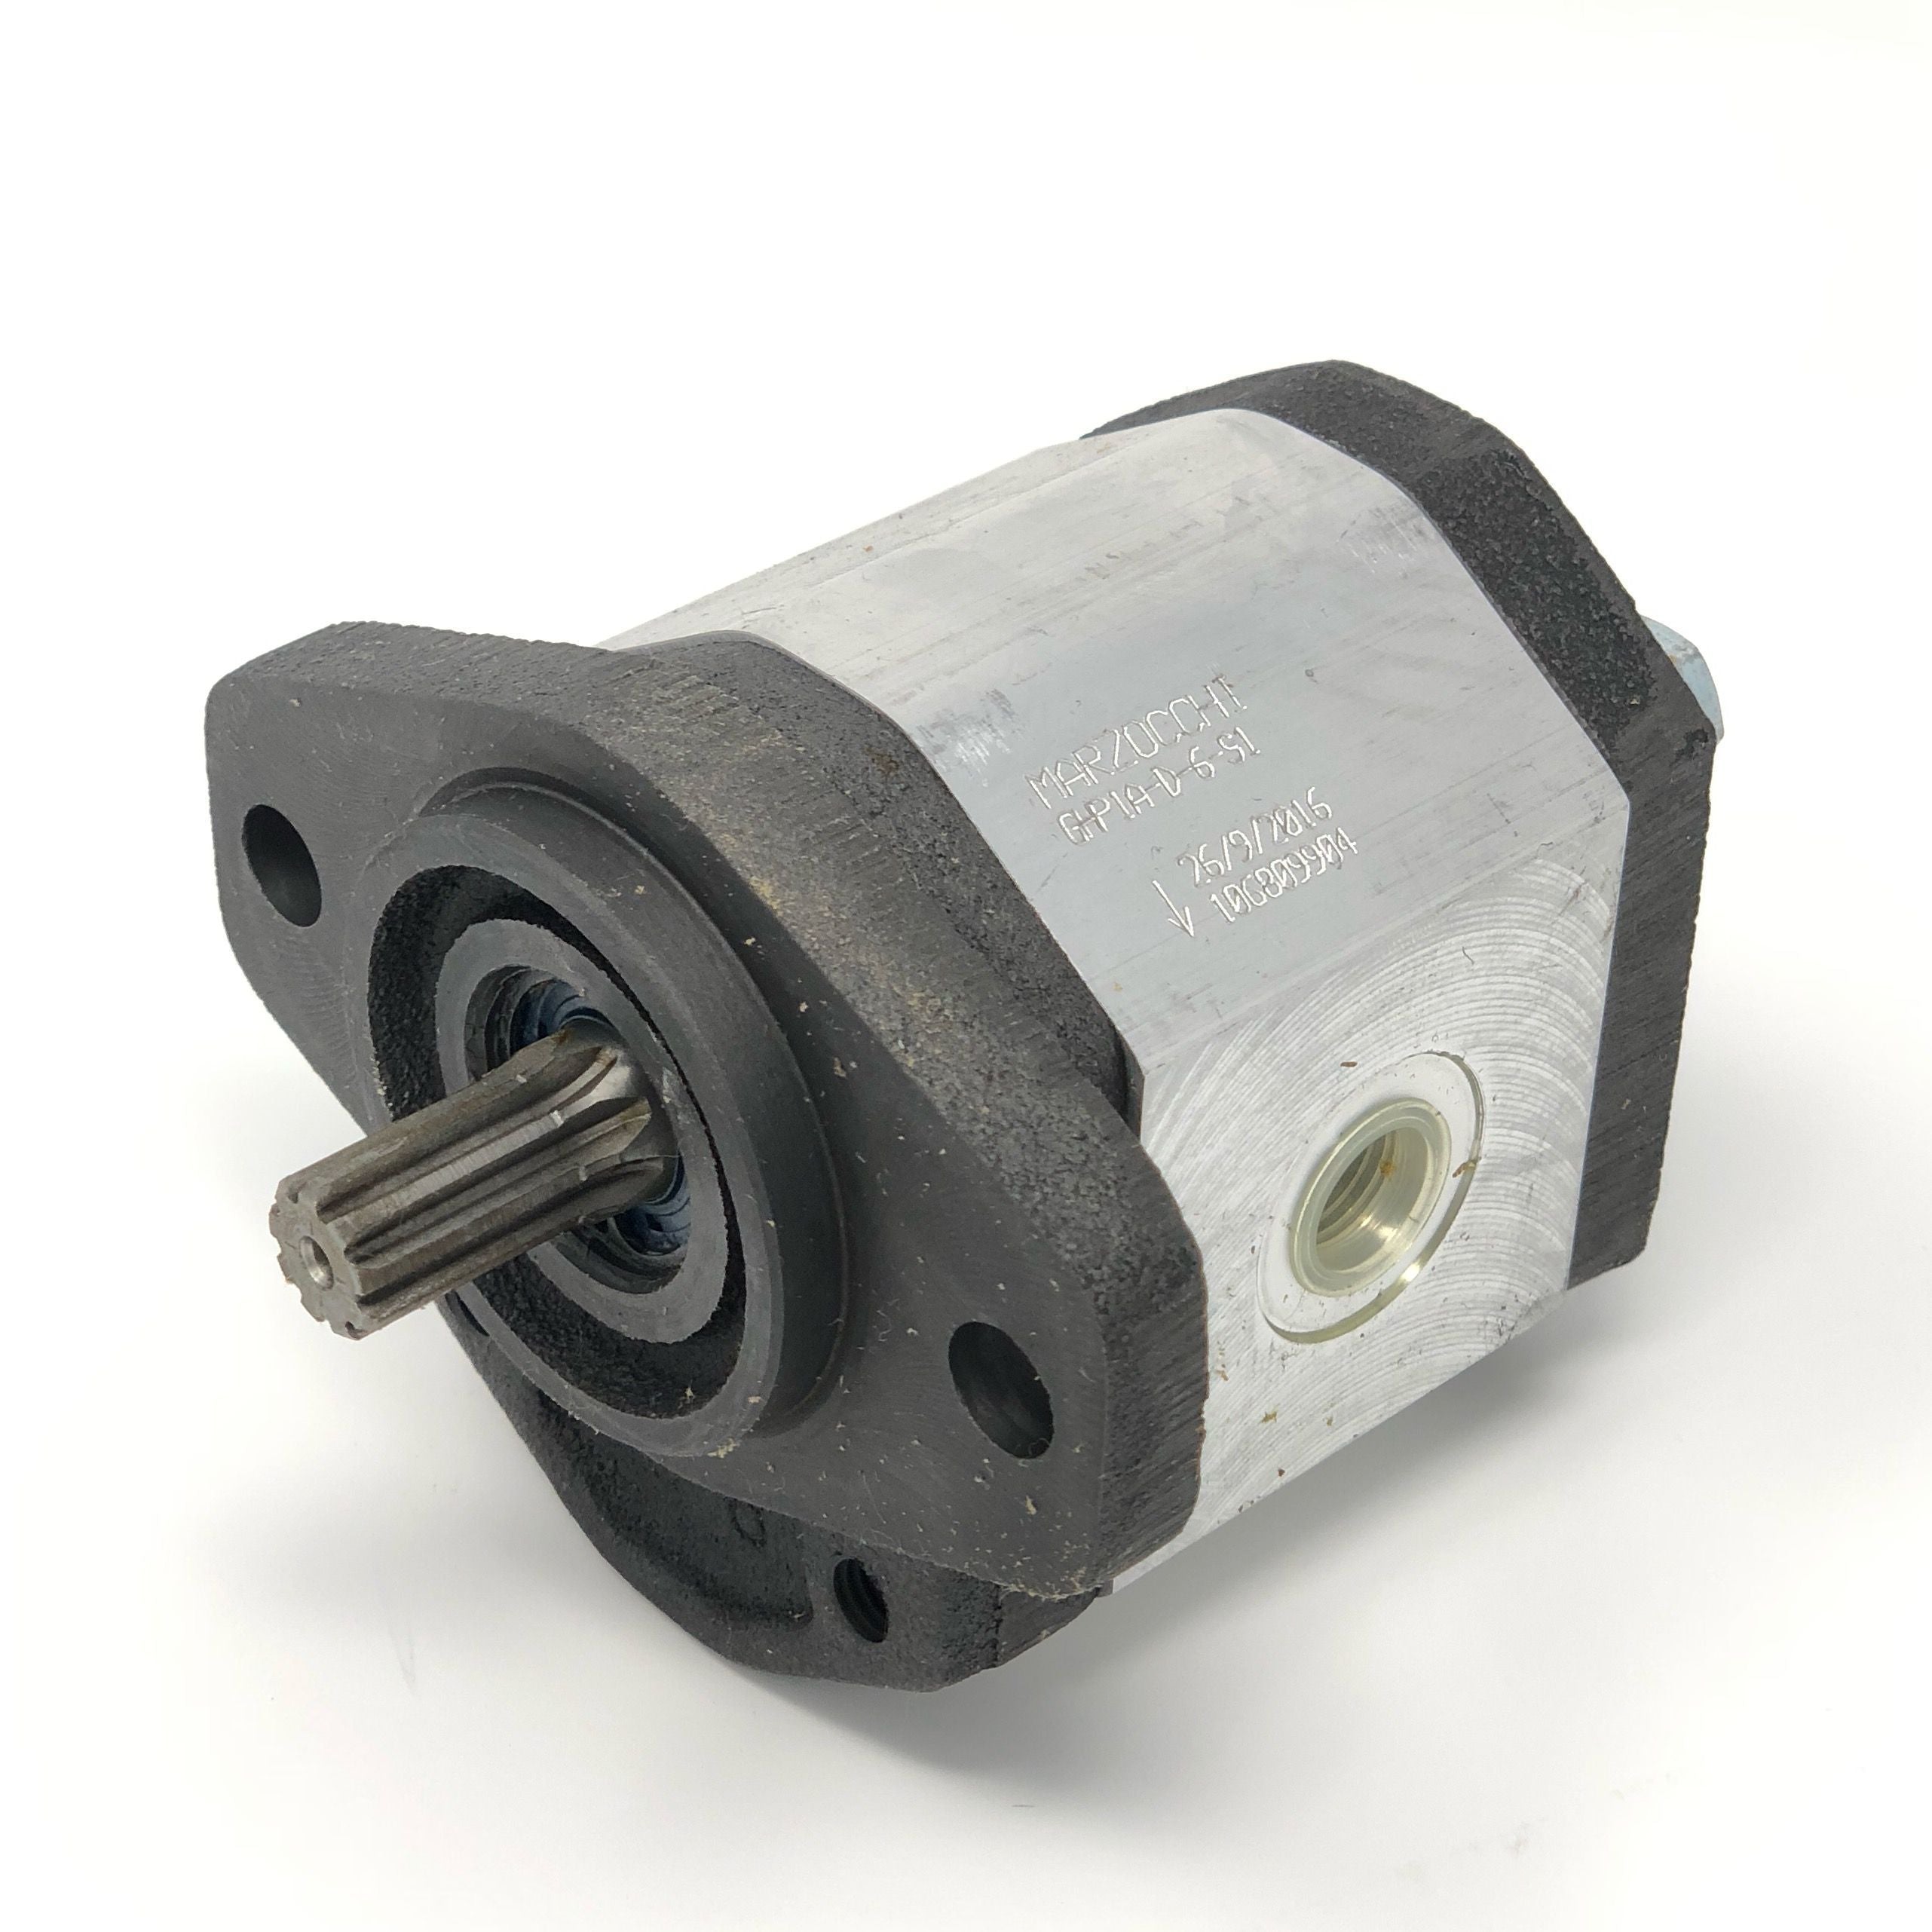 GHP1A-D-5-S1 : Marzocchi Gear Pump, CW, 3.5cc (0.2135in3), 1.66 GPM, 3915psi, 5000 RPM, #8 SAE (1/2") In, #6 SAE (3/8") Out, Splined Shaft 9T 20/40DP, SAE AA 2-Bolt Mount